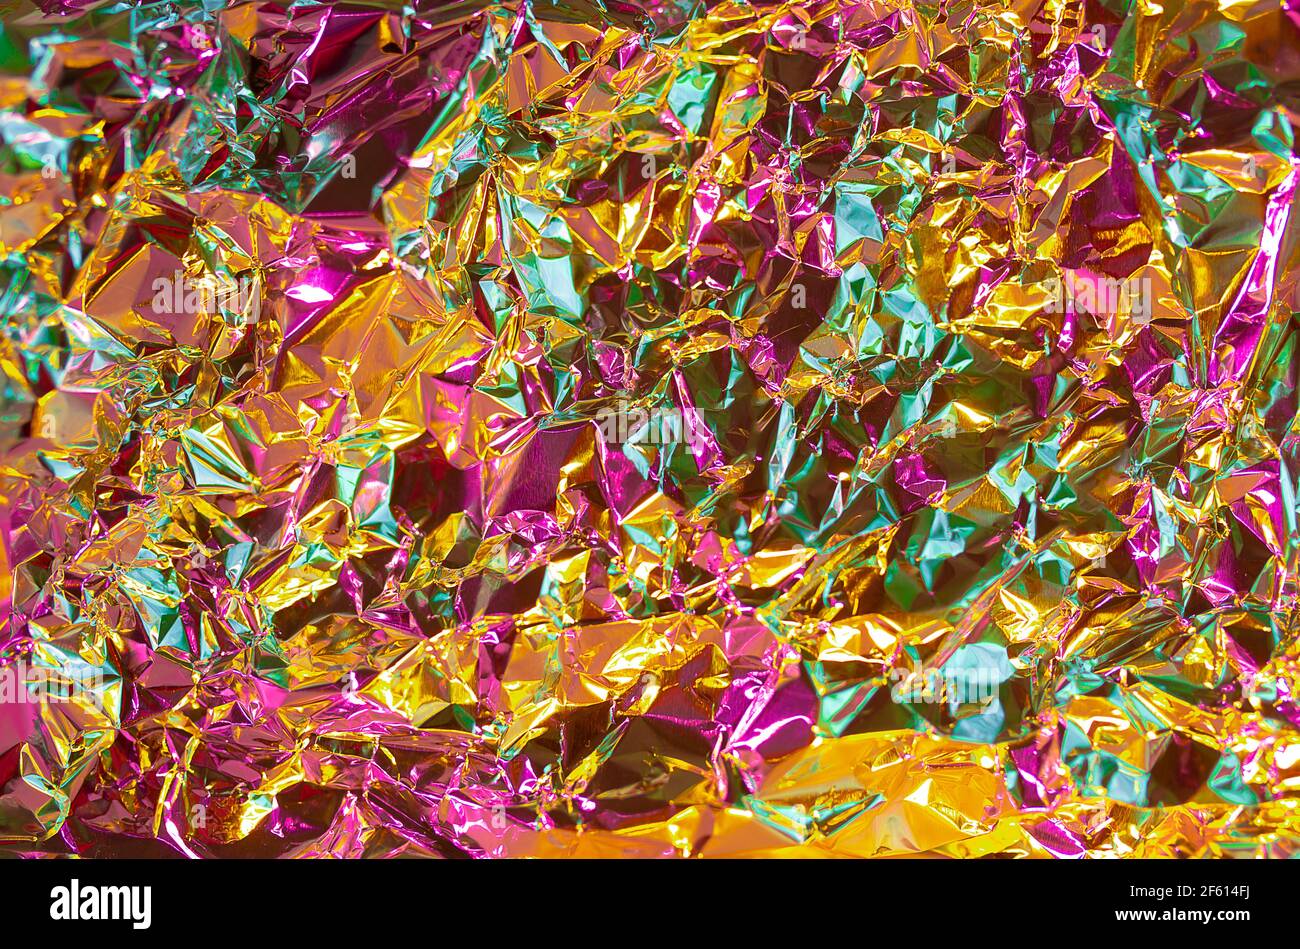 https://c8.alamy.com/comp/2F614FJ/gold-texture-effect-with-pink-and-green-multicolor-tint-futuristic-chrome-abstract-crumled-foil-paper-honey-gold-and-juicy-pink-fusion-colors-backgr-2F614FJ.jpg